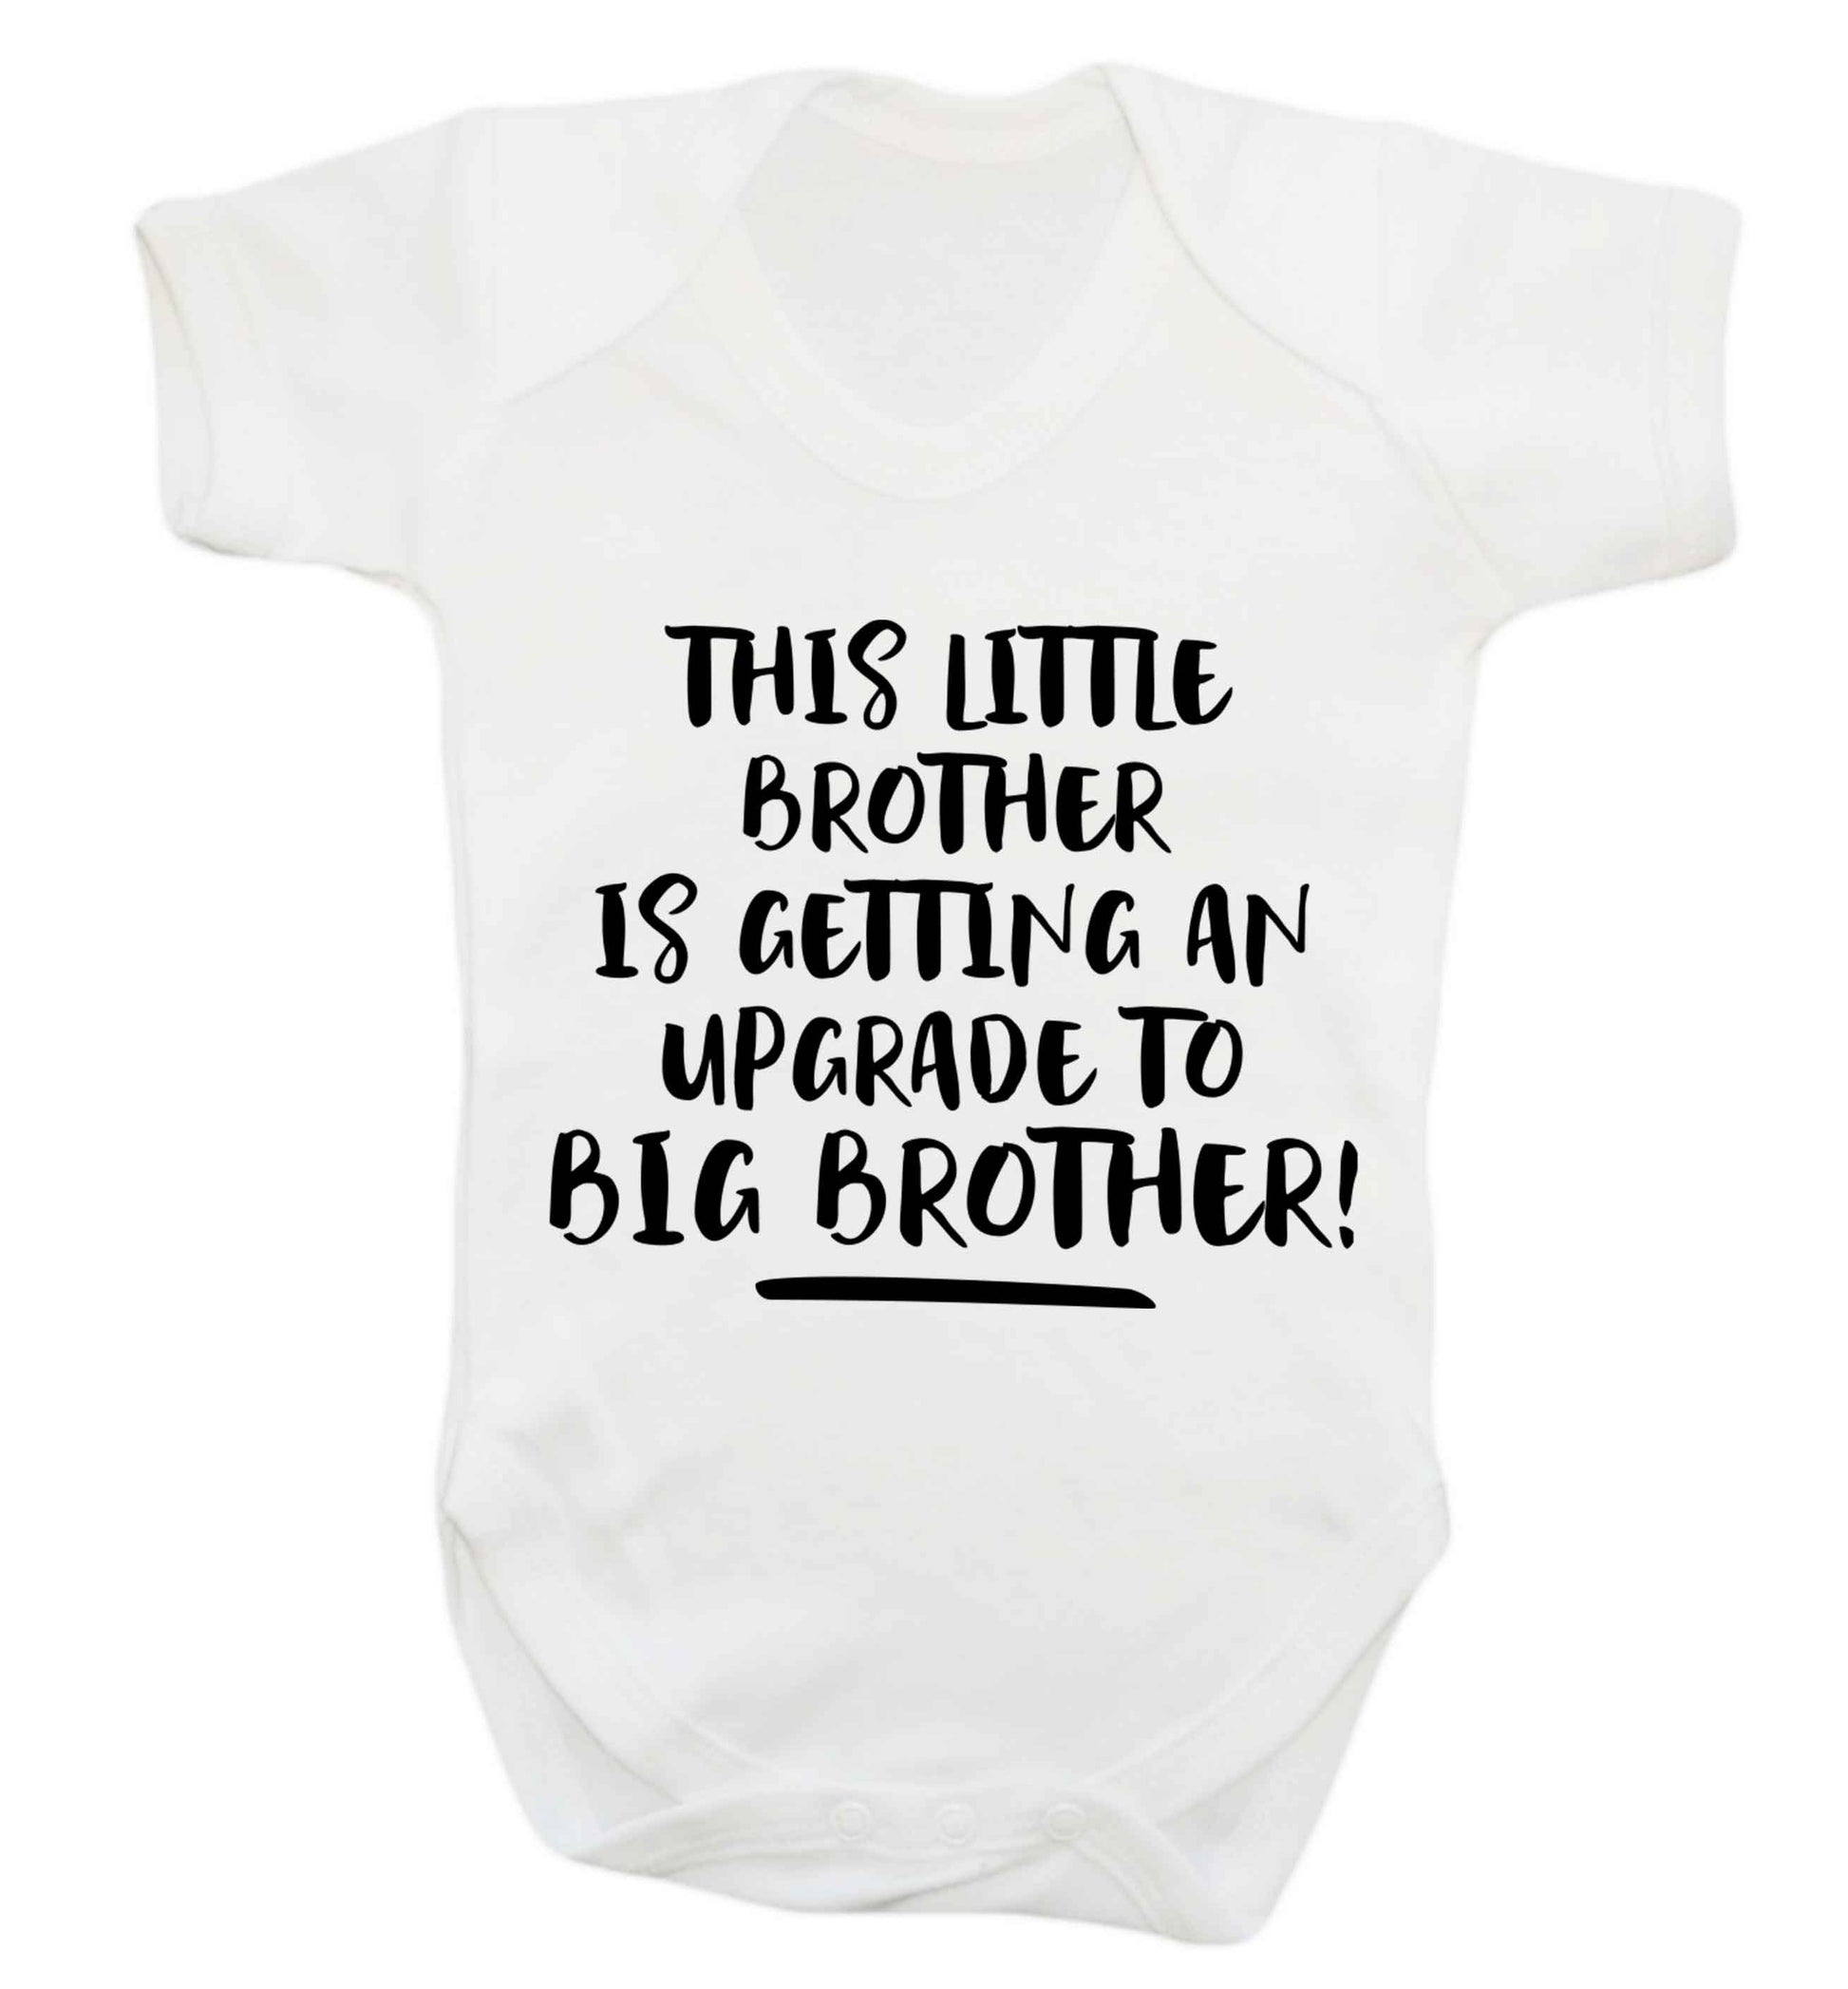 This little brother is getting an upgrade to big brother! Baby Vest white 18-24 months